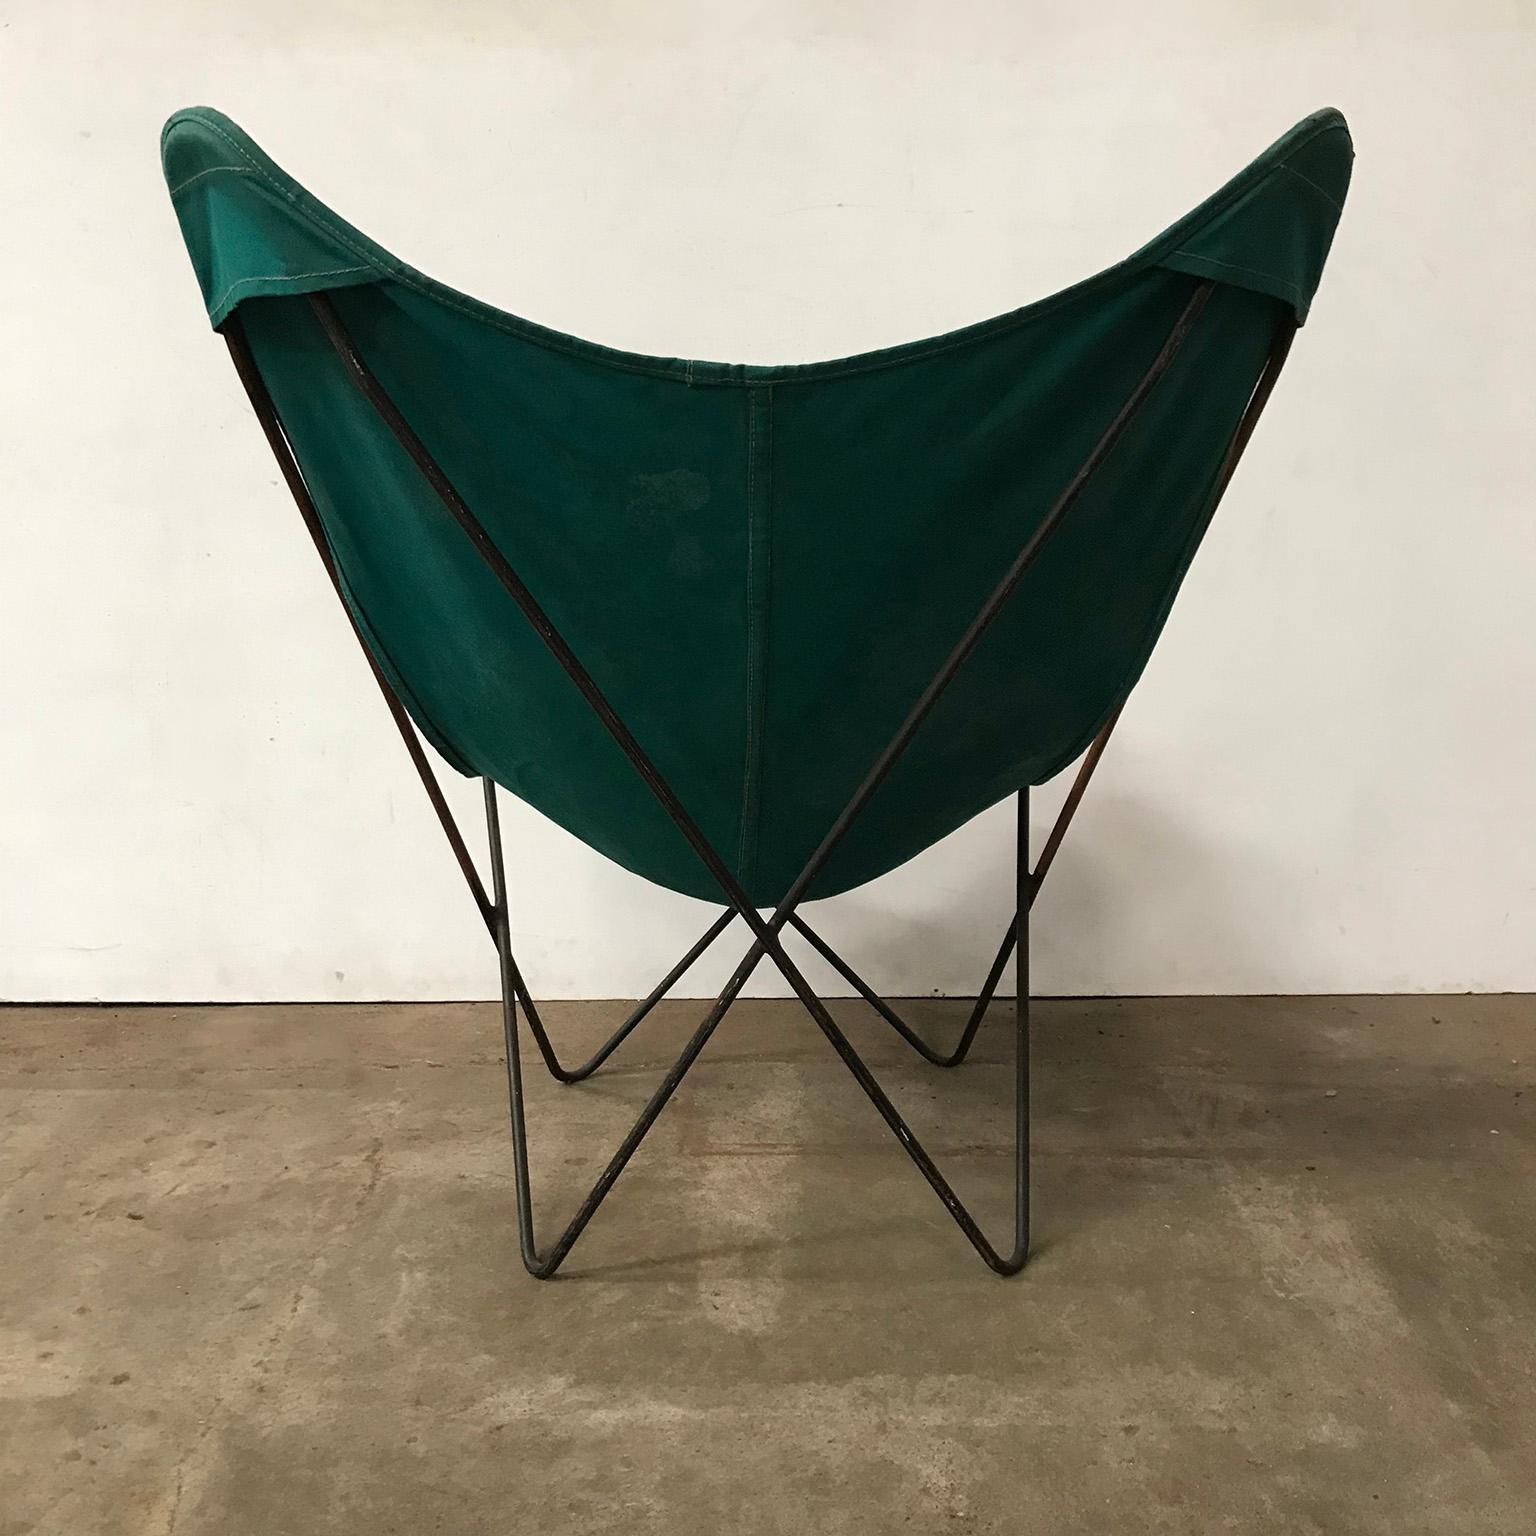 Industrial 1947, Hardoy, Ferrari, Green Cover with Grey Base Butterfly Chair